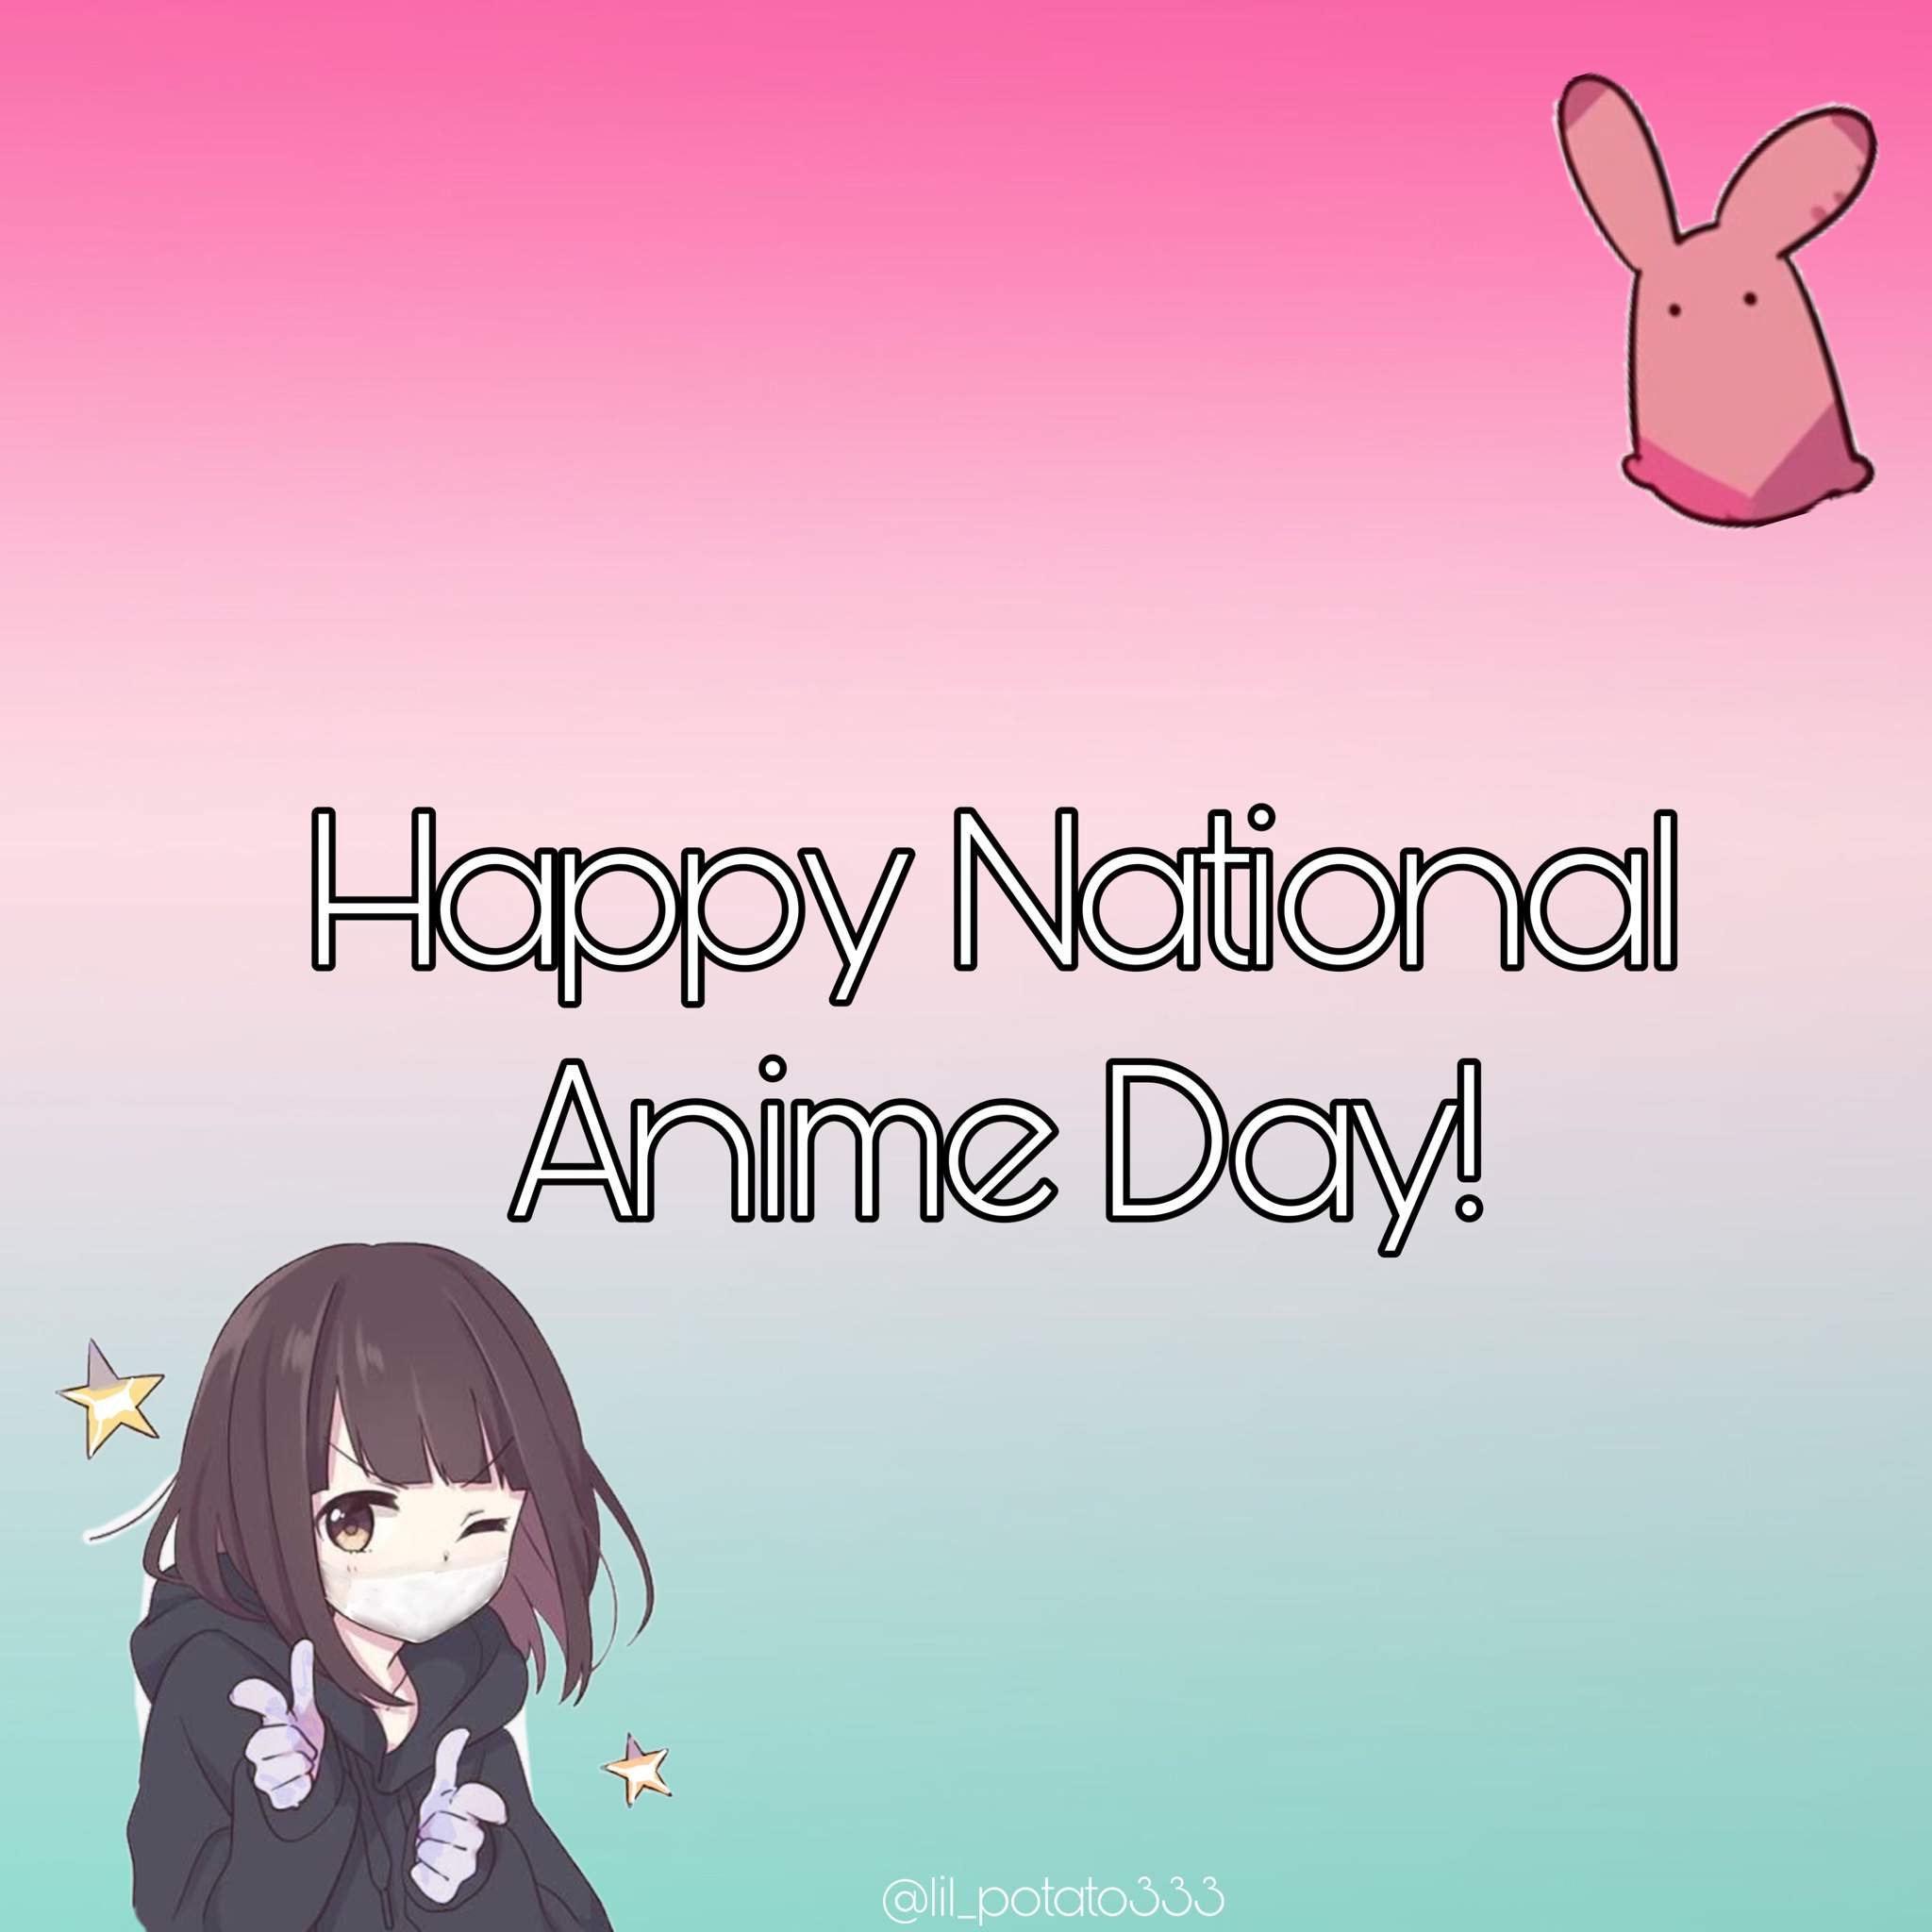 National Anime Day All fanart posts must flaired and posted as a text post